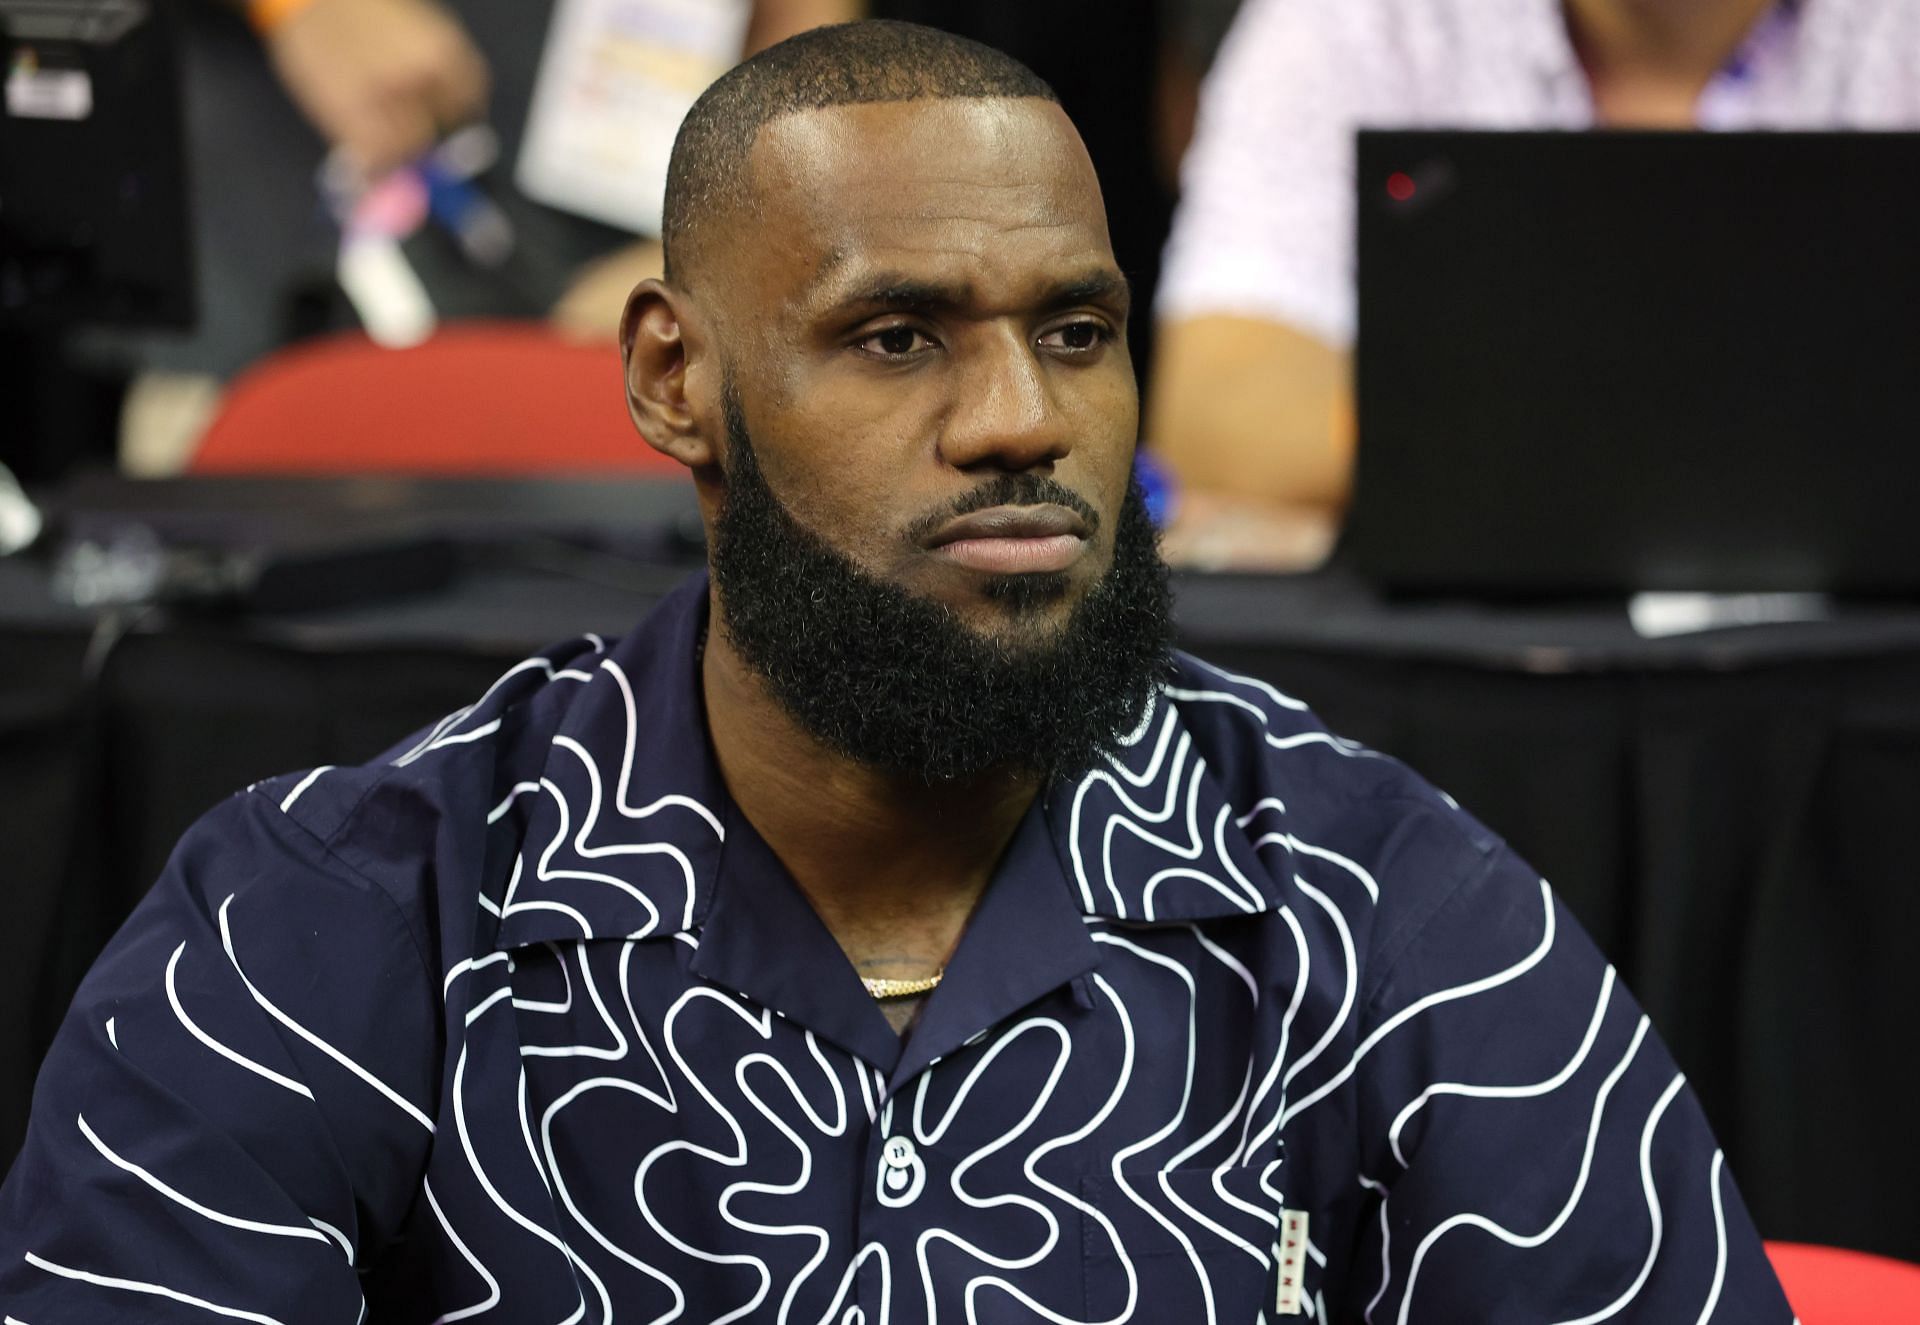 LeBron James in attendance at a Summer League game